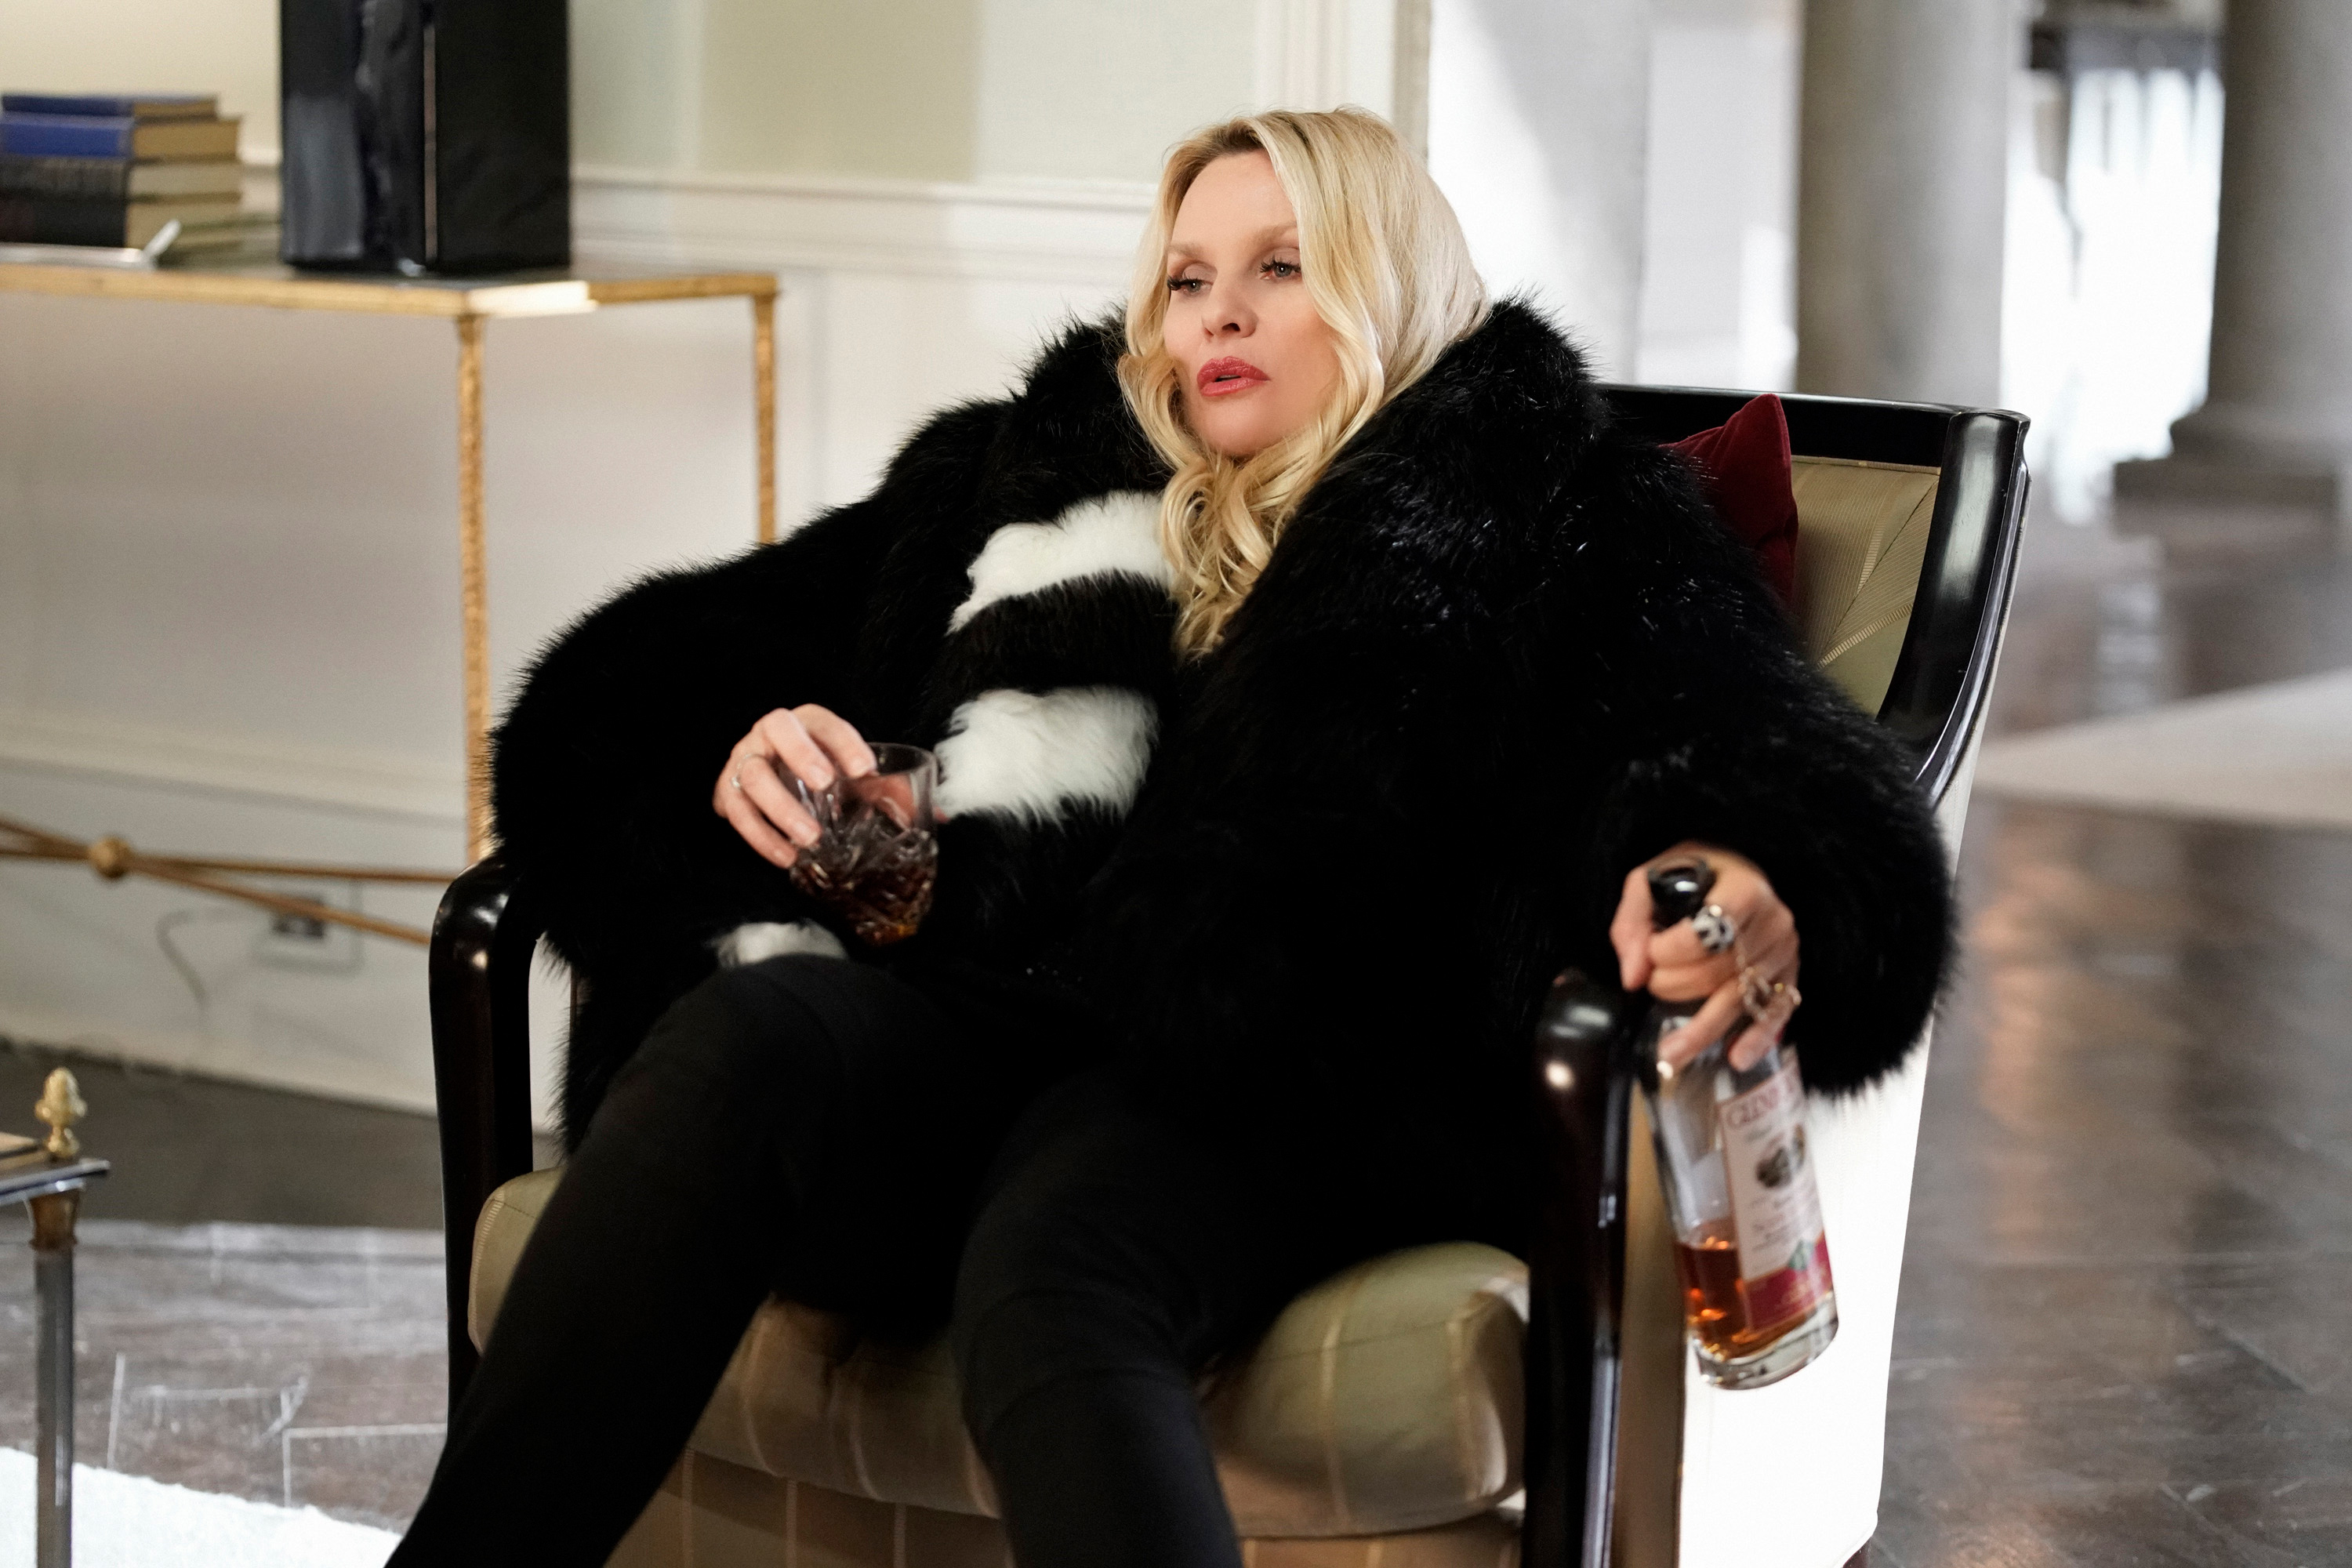 Alexis in a plush chair holding a bottle of liquor in one hand and a glass in the other, dressed in a luxurious fur coat, appearing relaxed